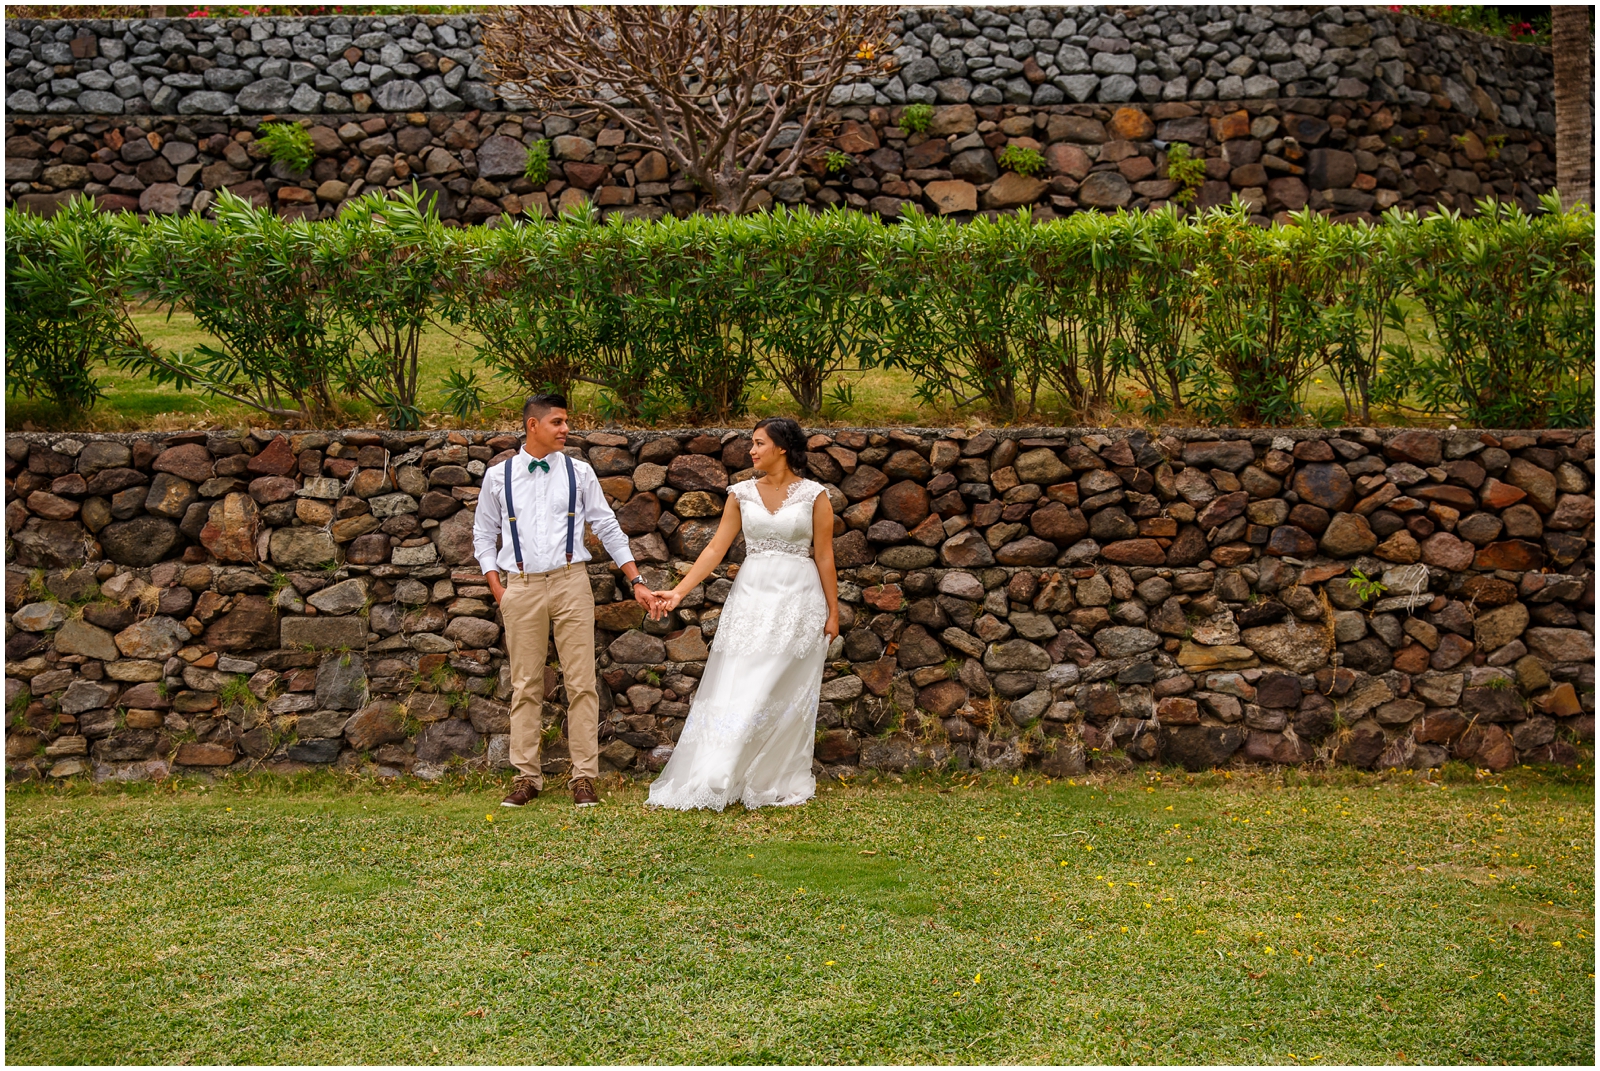 A bride and groom on a terrace in Nicaragua.